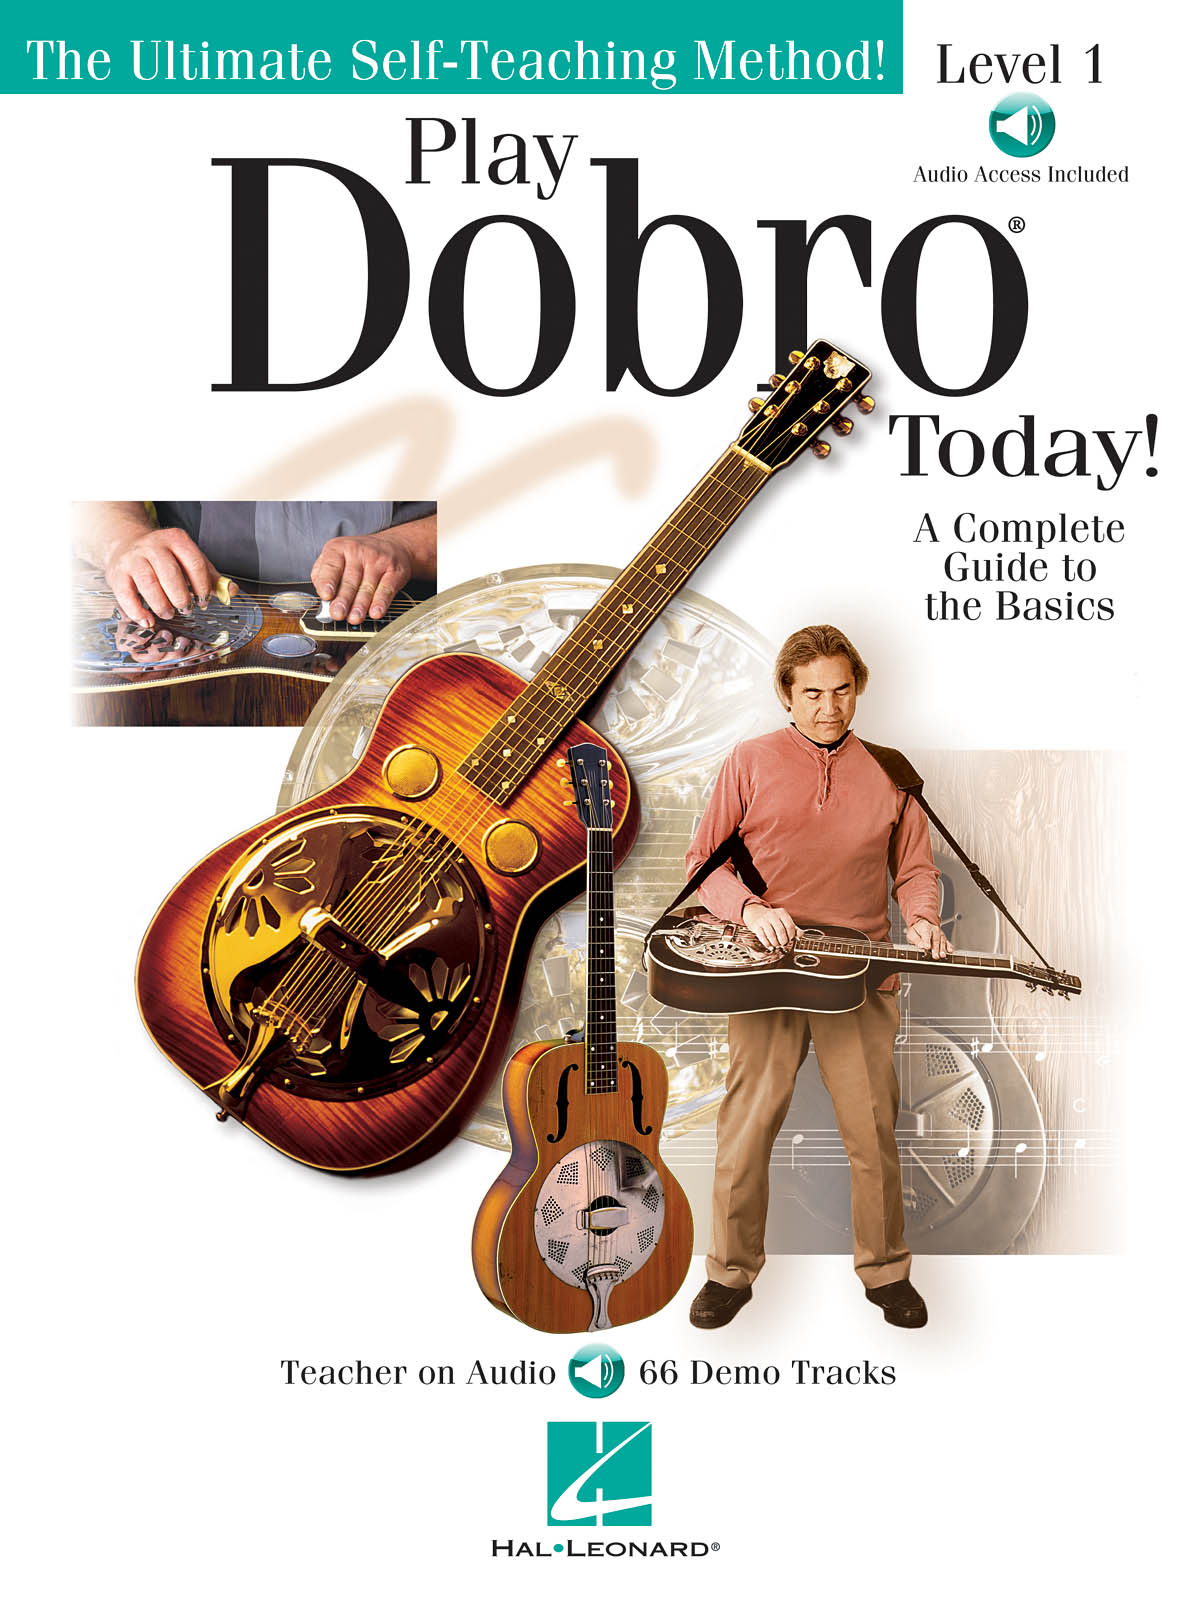 Play Dobro Today! - Level 1 - A Complete Guide to the Basics